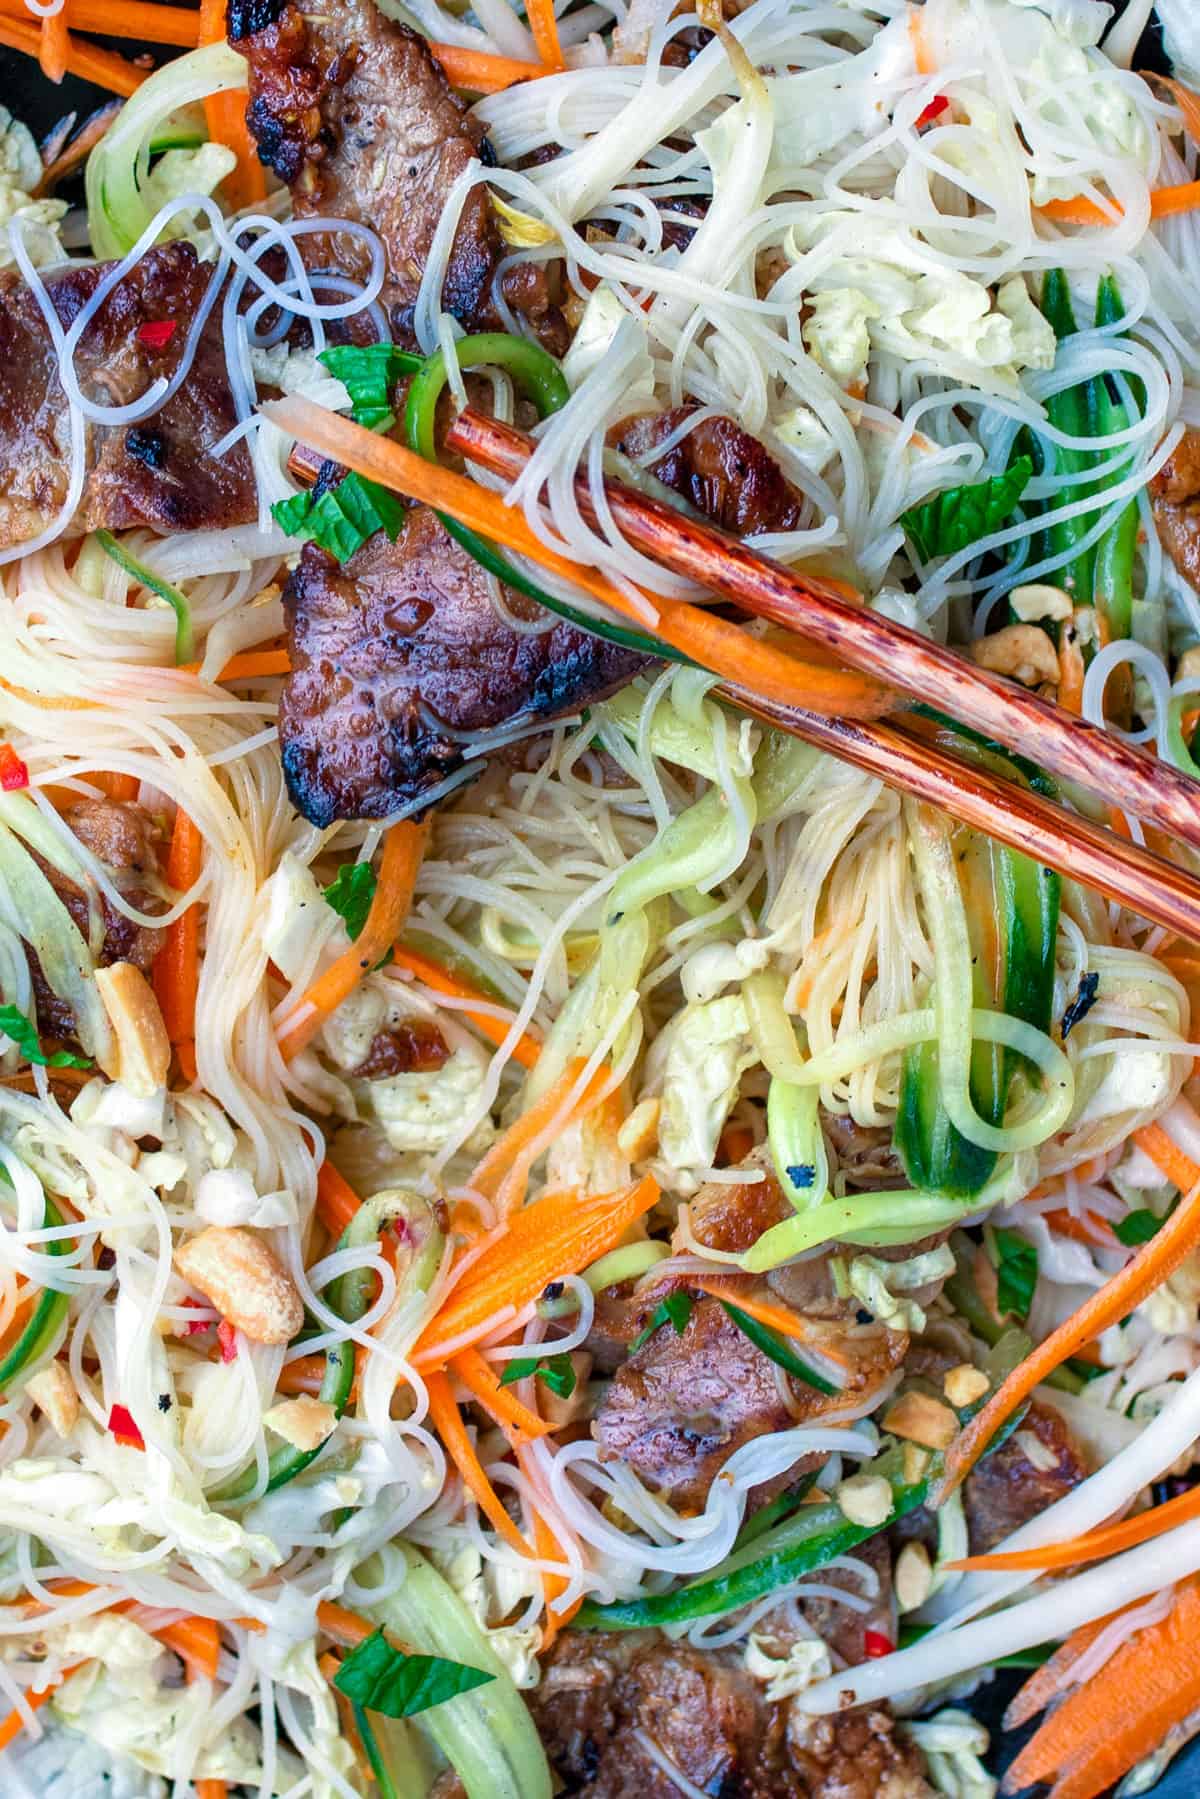 A tangle of thin rice noodles, shredded carrots, cucumber and cabbage, and caramelized pork, with chopsticks holding one bite-sized piece of pork.